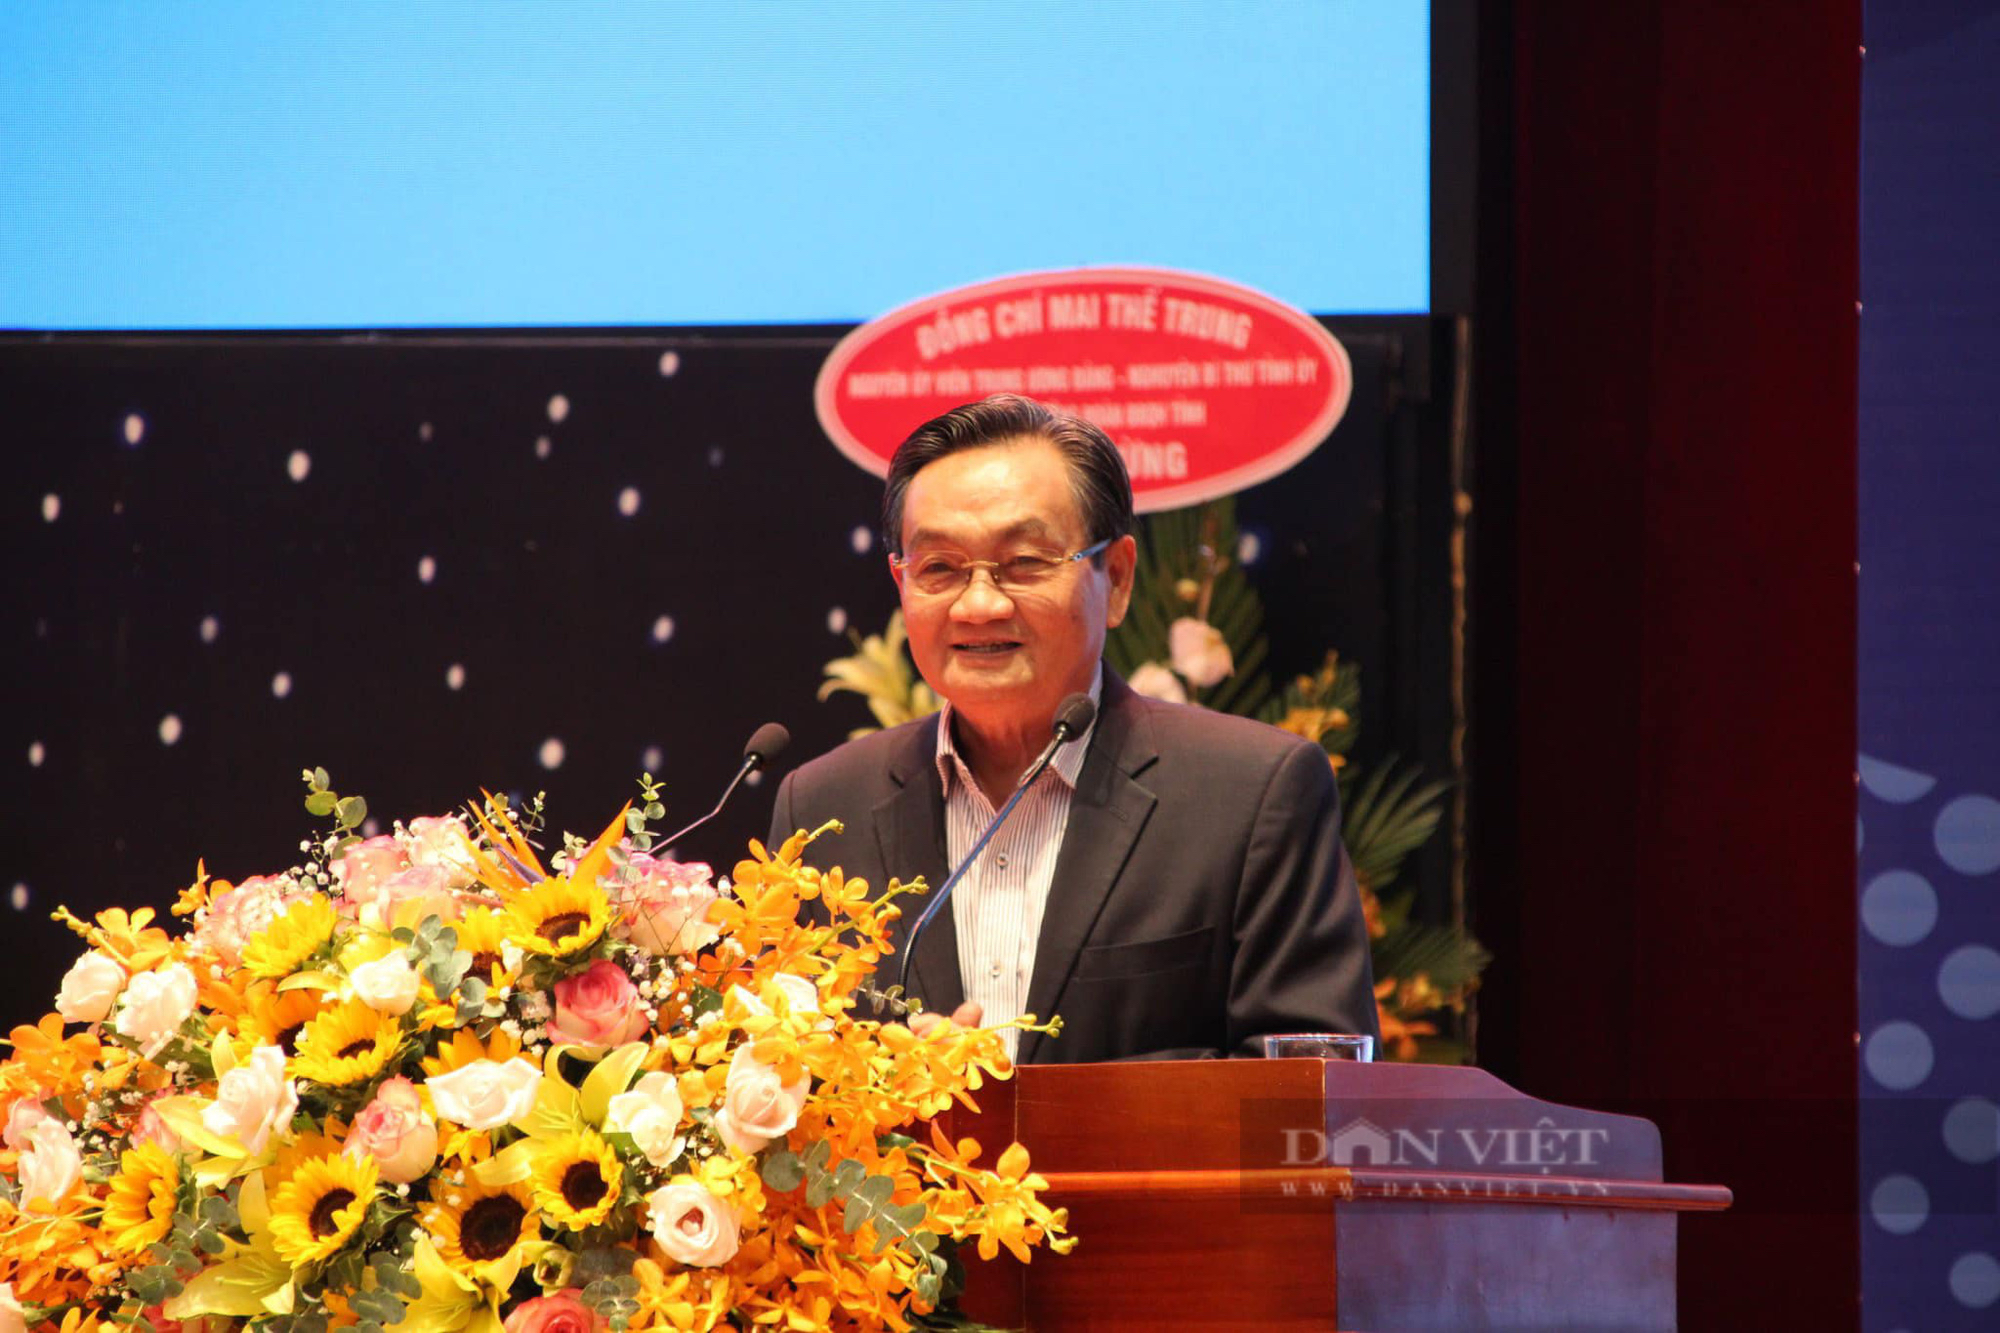 Binh Duong uses state-owned enterprises as 